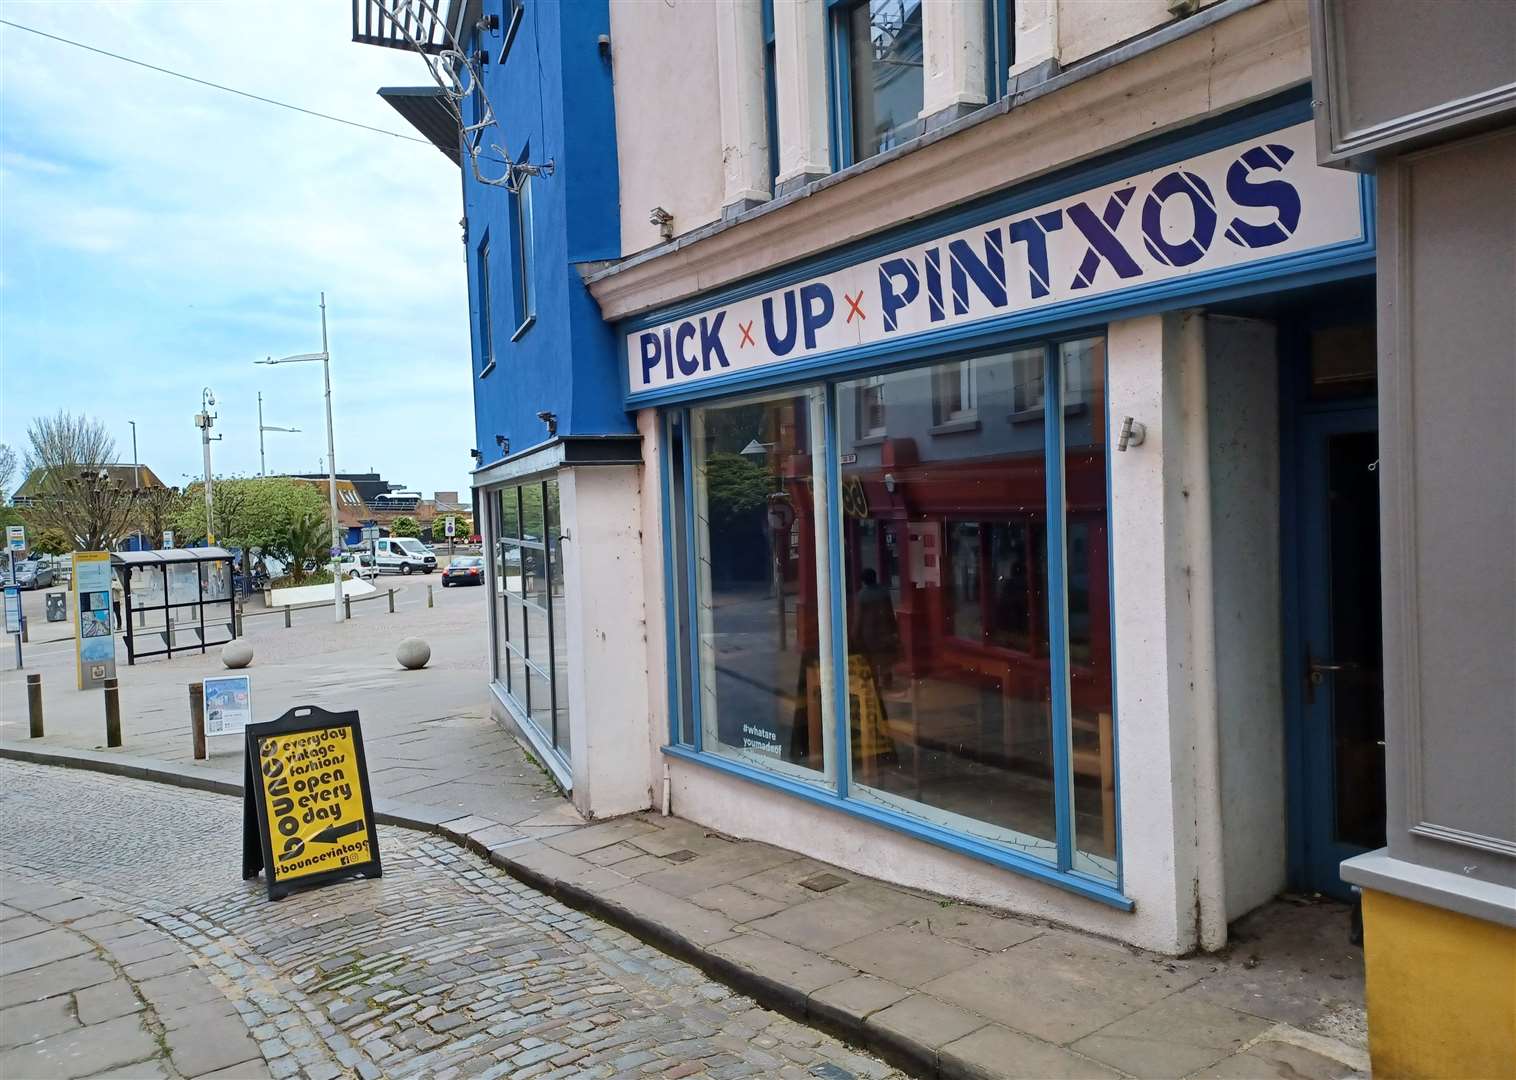 Marleys has filled the former Pick Up Pintxos unit